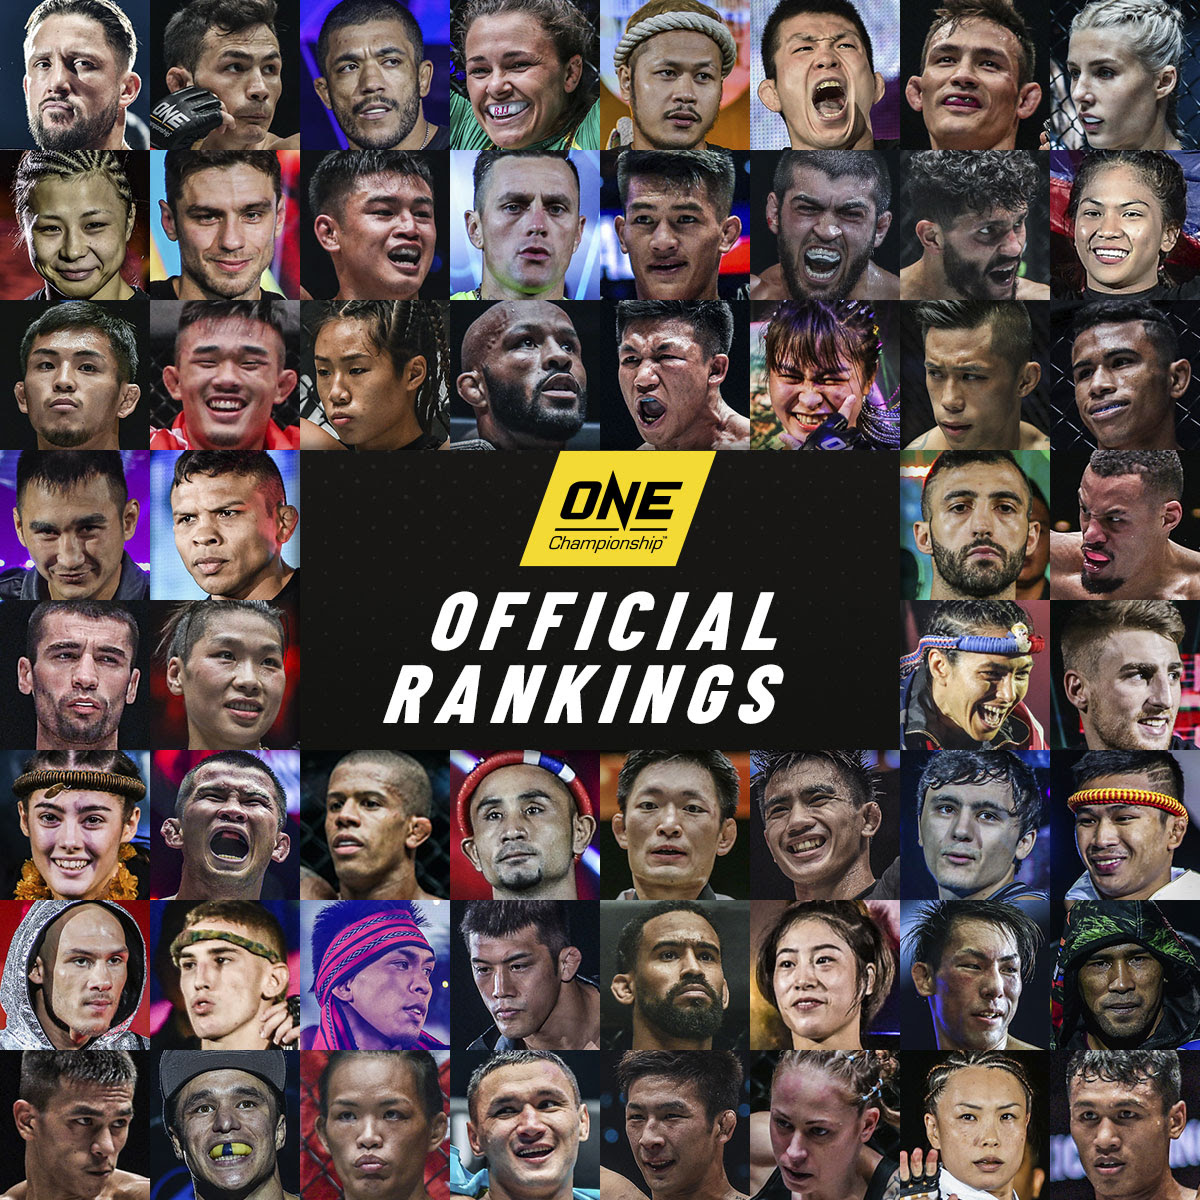 The largest global sports media property in Asian history, ONE Championship™ (ONE), today announced its first official athlete rankings for select weight divisions across Mixed Martial Arts, Muay Thai, and Kickboxing. Rankings for other weight divisions will be introduced in the future.